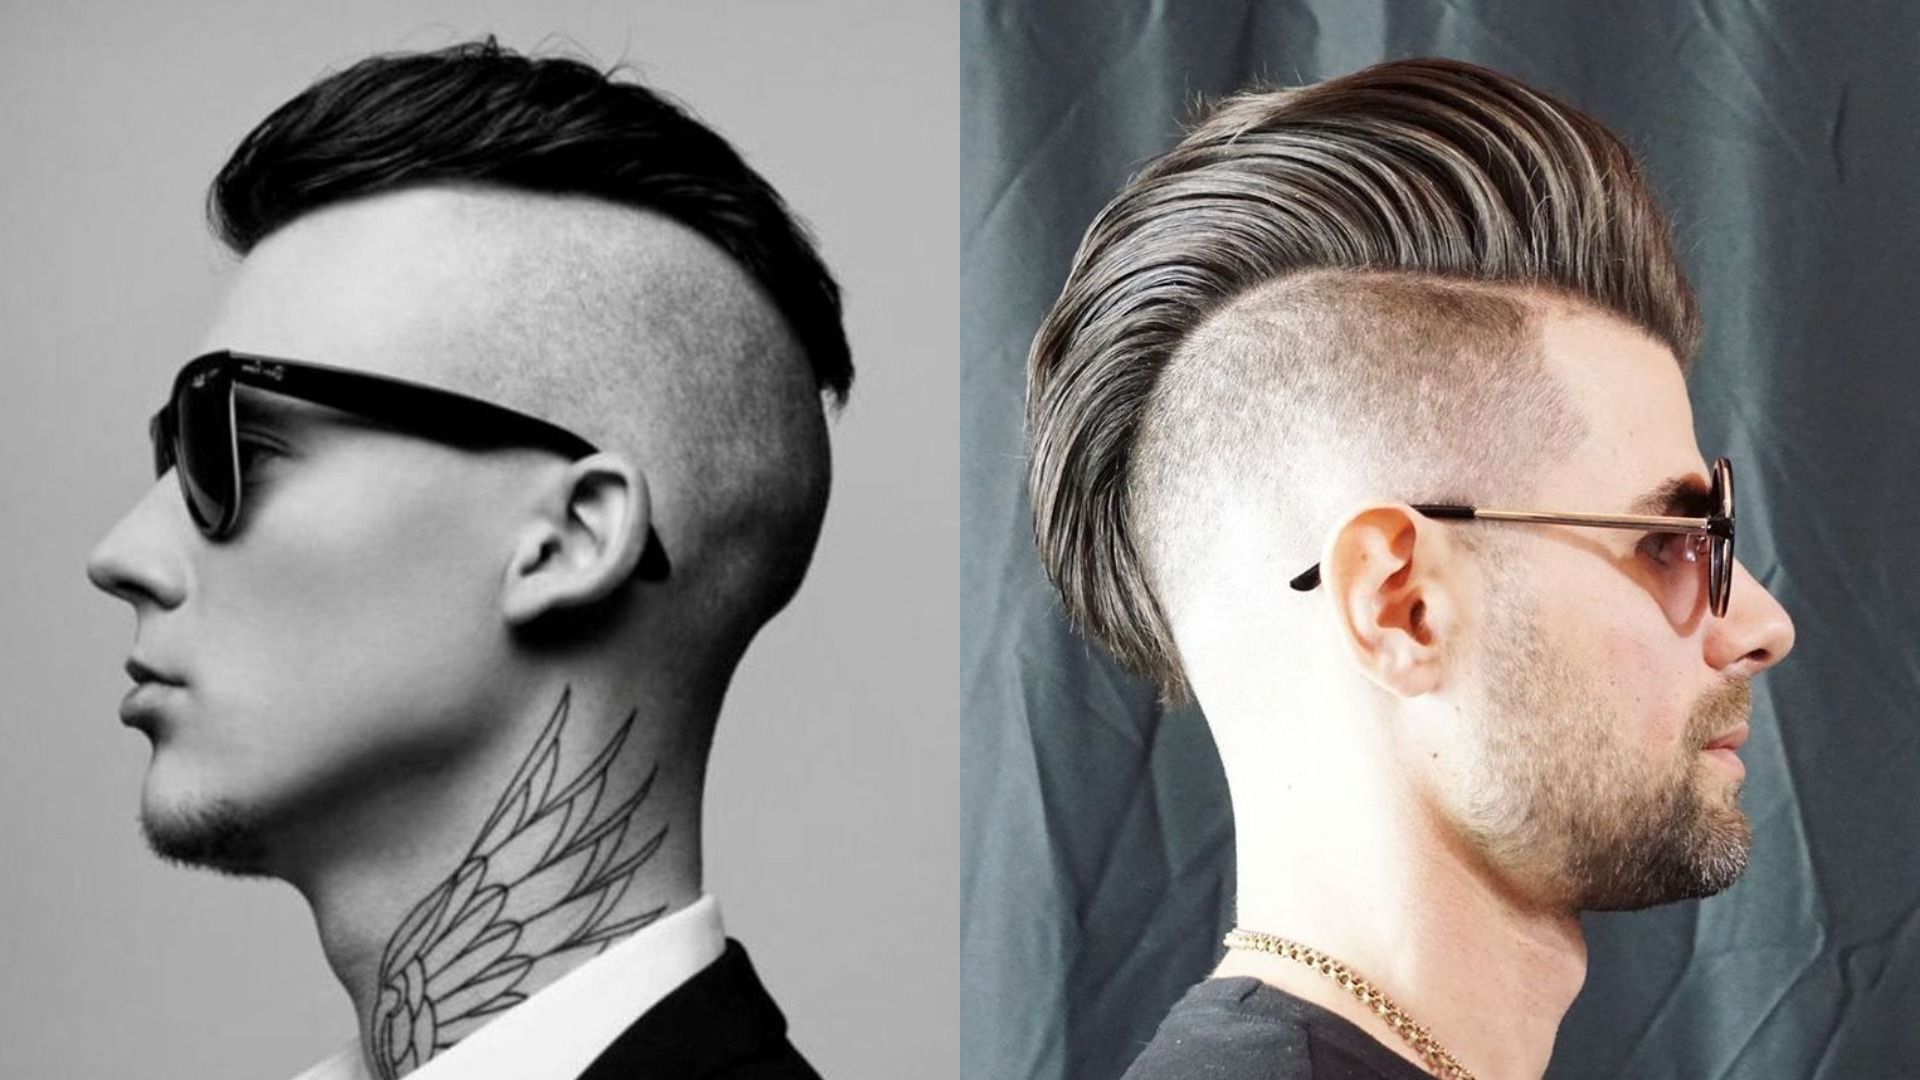 Mohawk Hairstyles: 50 Best Haircuts For Men 2018 – Atoz Intended For Latest Shaved And Colored Mohawk Haircuts (View 15 of 20)